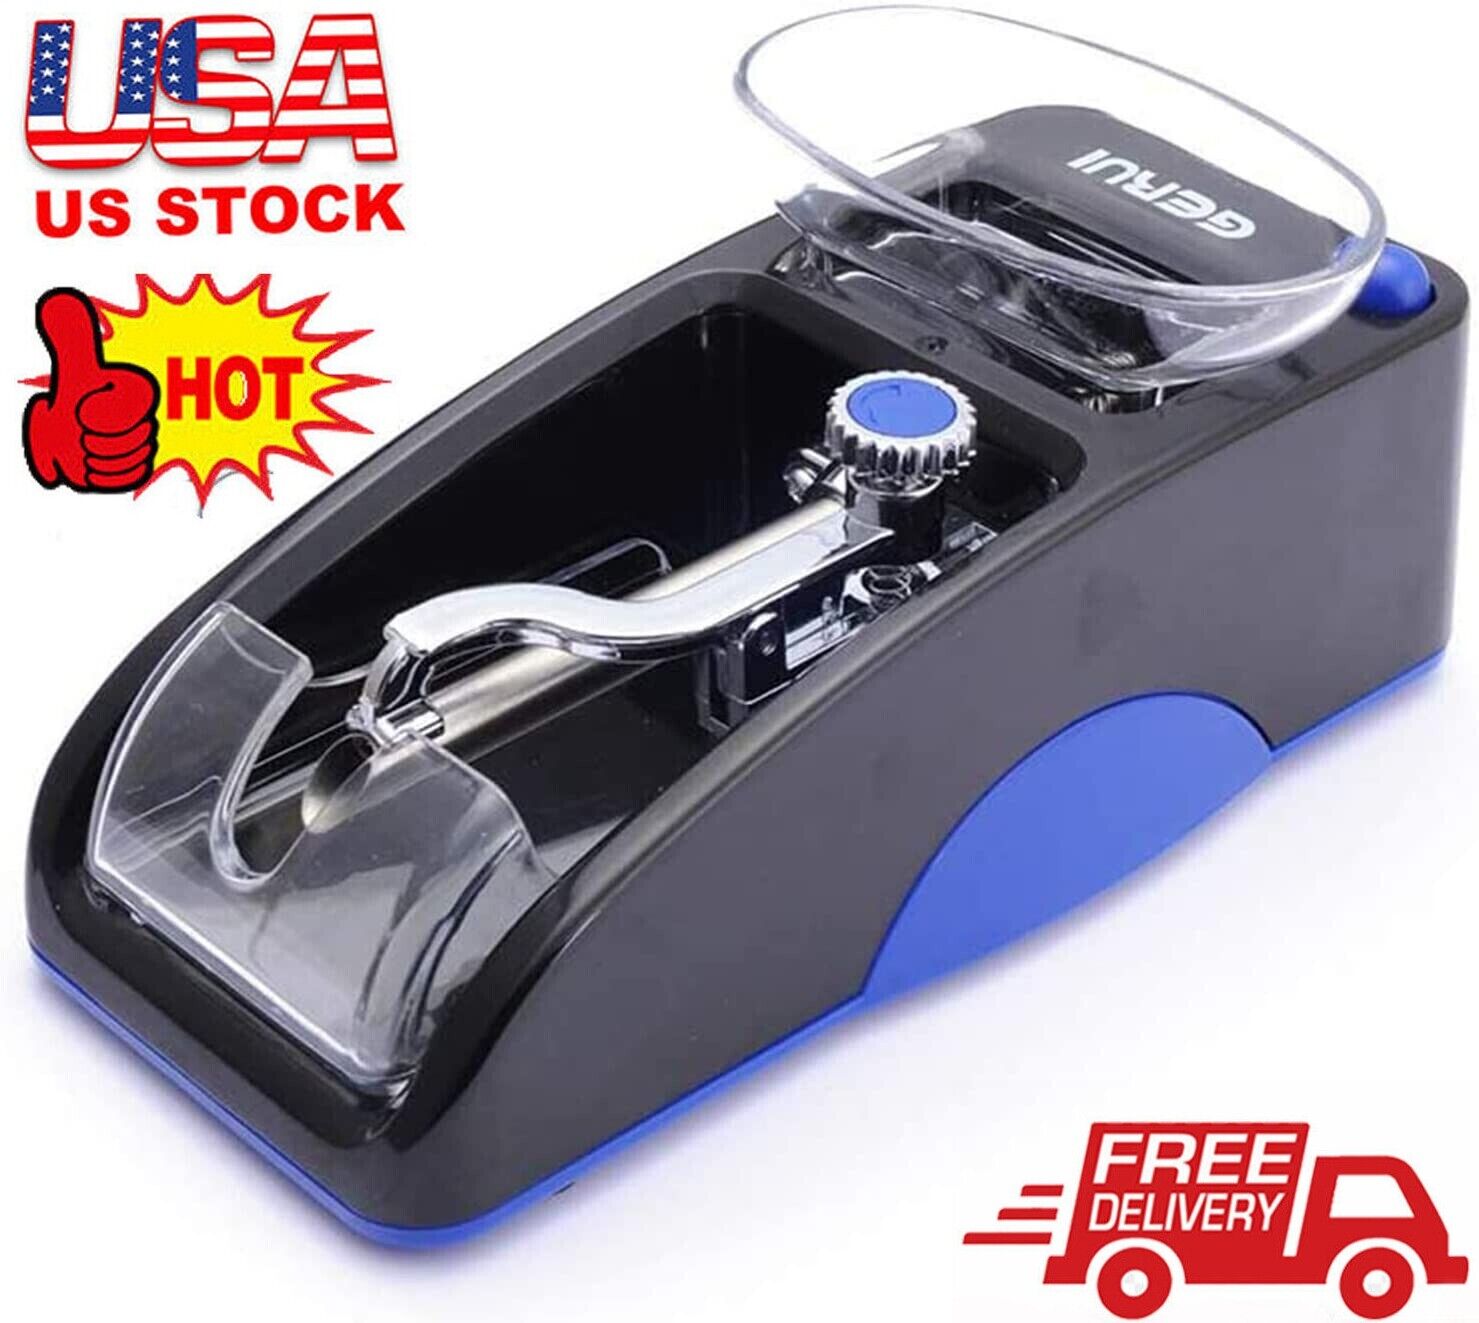 Cigarette Machine Automatic Electric Rolling Roller Tobacco Injector Maker USA